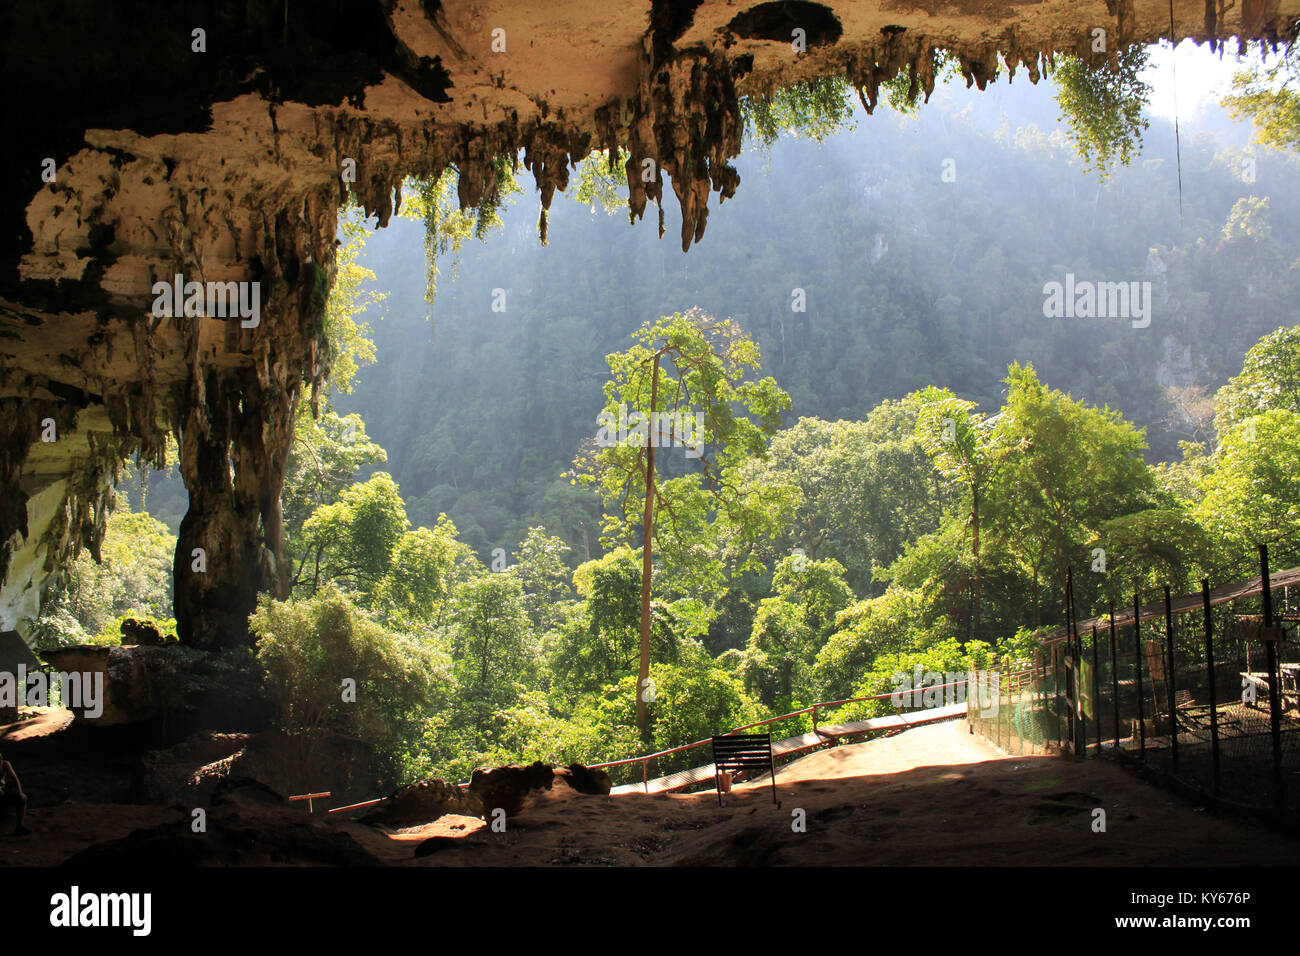 Entrance of big cave in Niah national park, Borneo, Malaysia Stock Photo